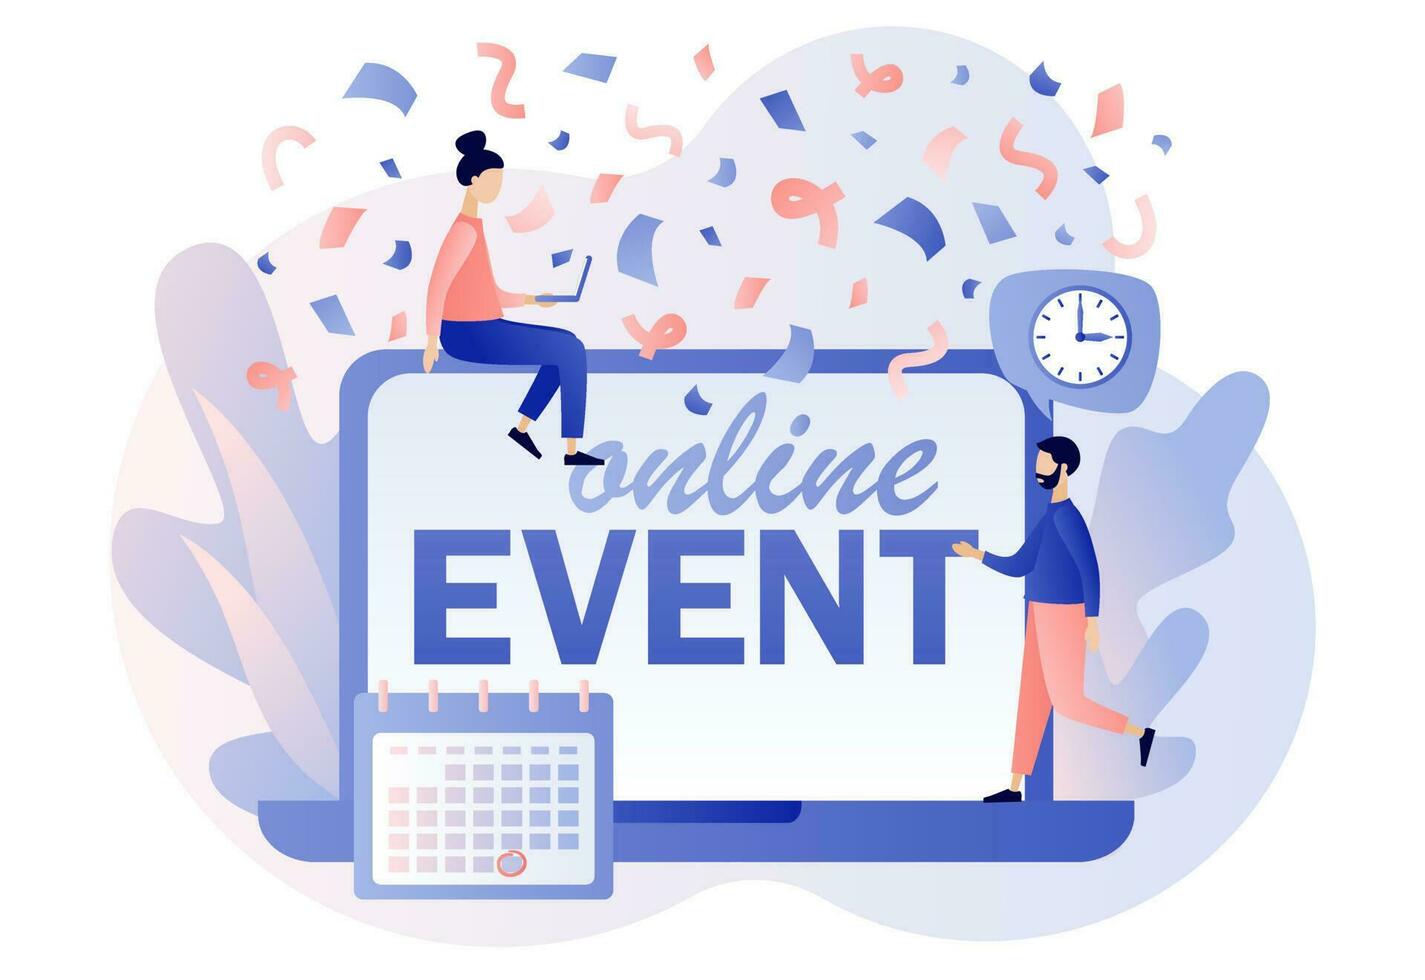 Online events - text on laptop screen. Corporate party, meeting friends and colleagues. Video conference. Tiny people celebration. Modern flat cartoon style. Vector illustration on white background